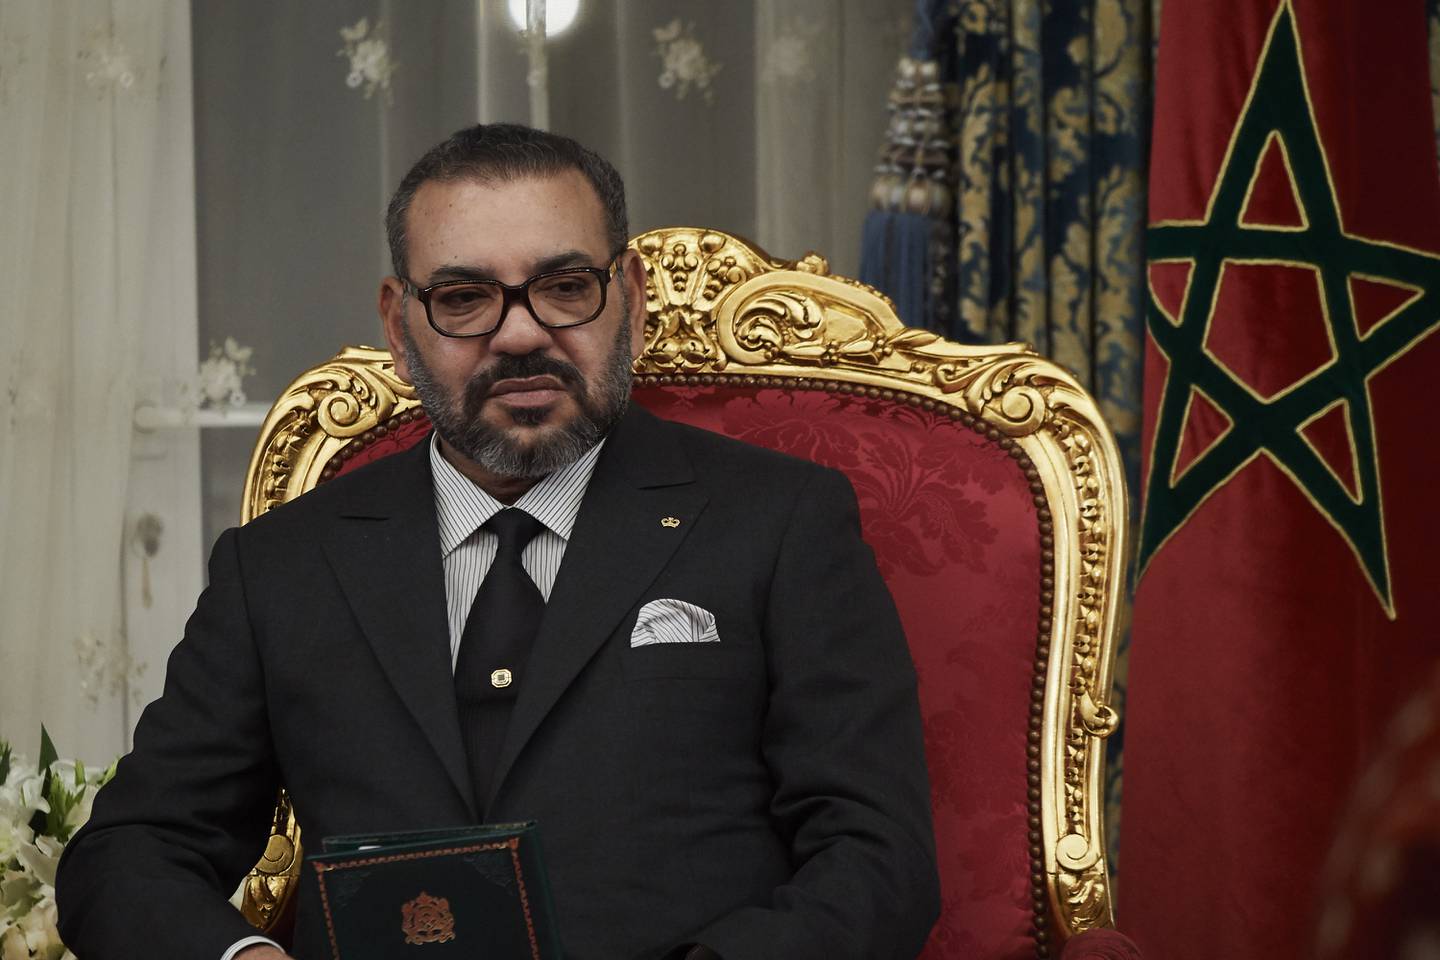 RABAT, MOROCCO - FEBRUARY 13: King Mohammed VI of Morocco  attends the signing of bilateral agreements at the Agdal Royal Palace on February 13, 2019 in Rabat, Morocco. The Spanish Royals are on a two day visit to Morocco. (Photo by Carlos Alvarez/Getty Images)